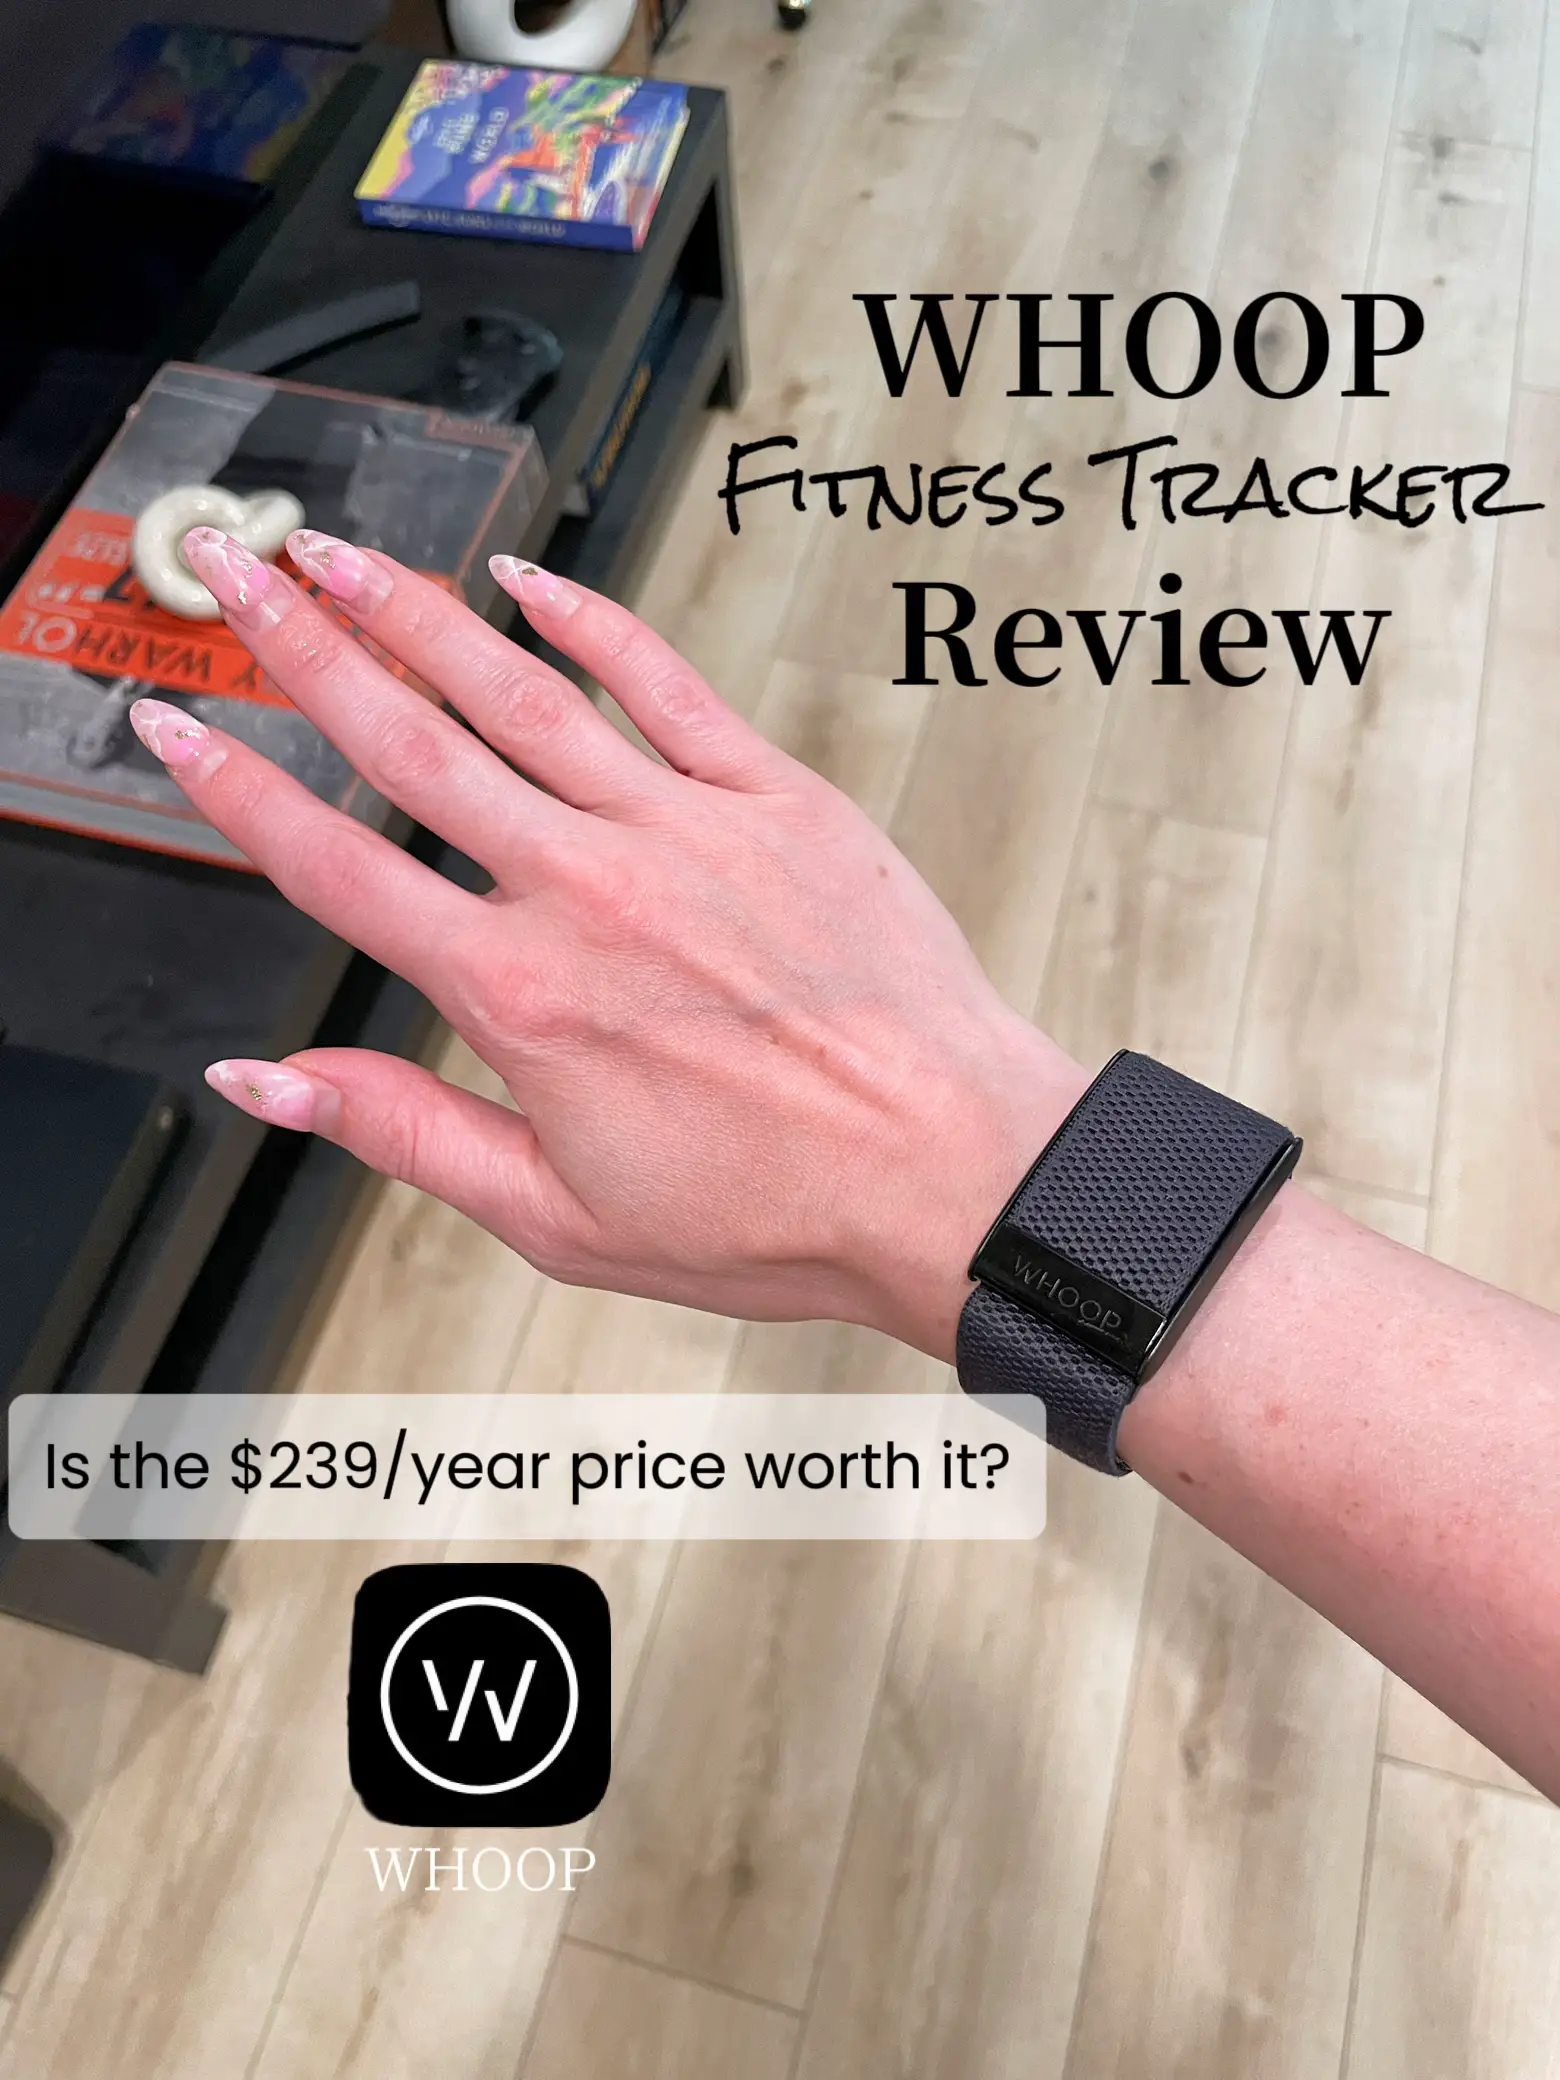  A person is wearing a fitness tracker that is being advertised for $239/year.